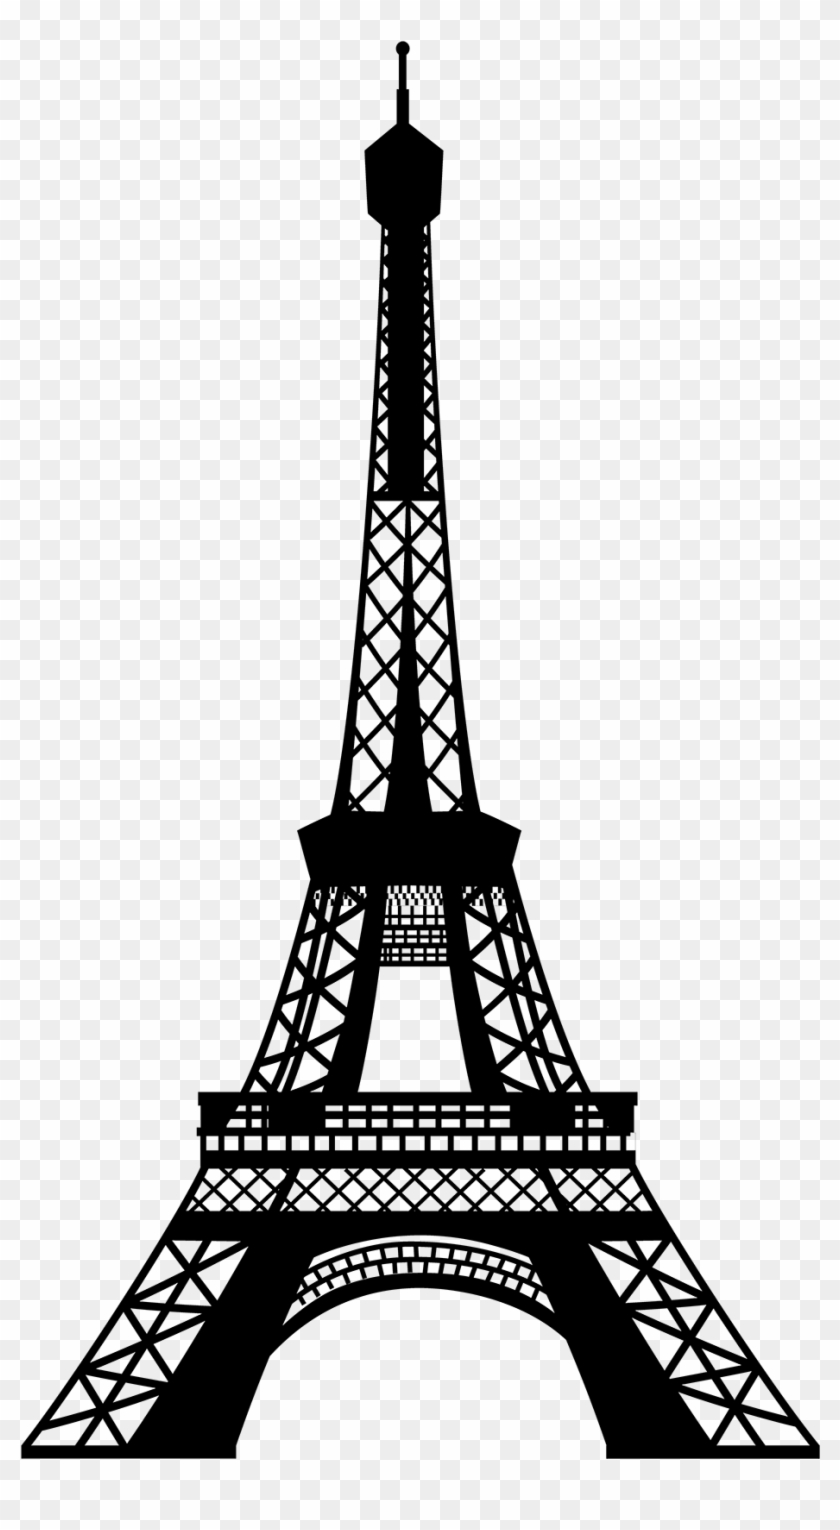 Eiffel Tower Silhouette Png